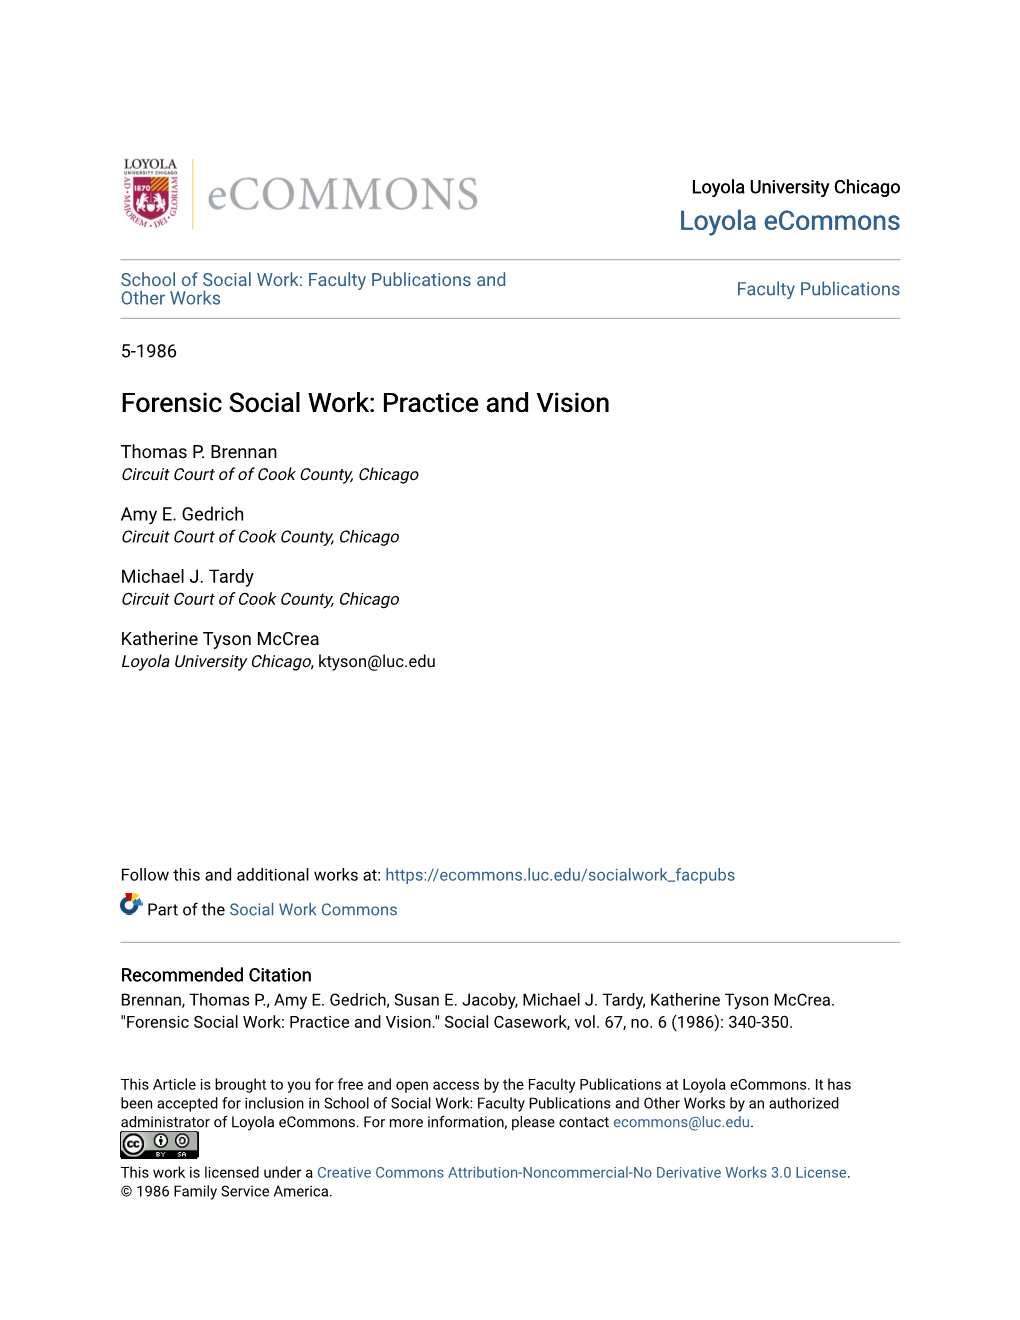 Forensic Social Work: Practice and Vision